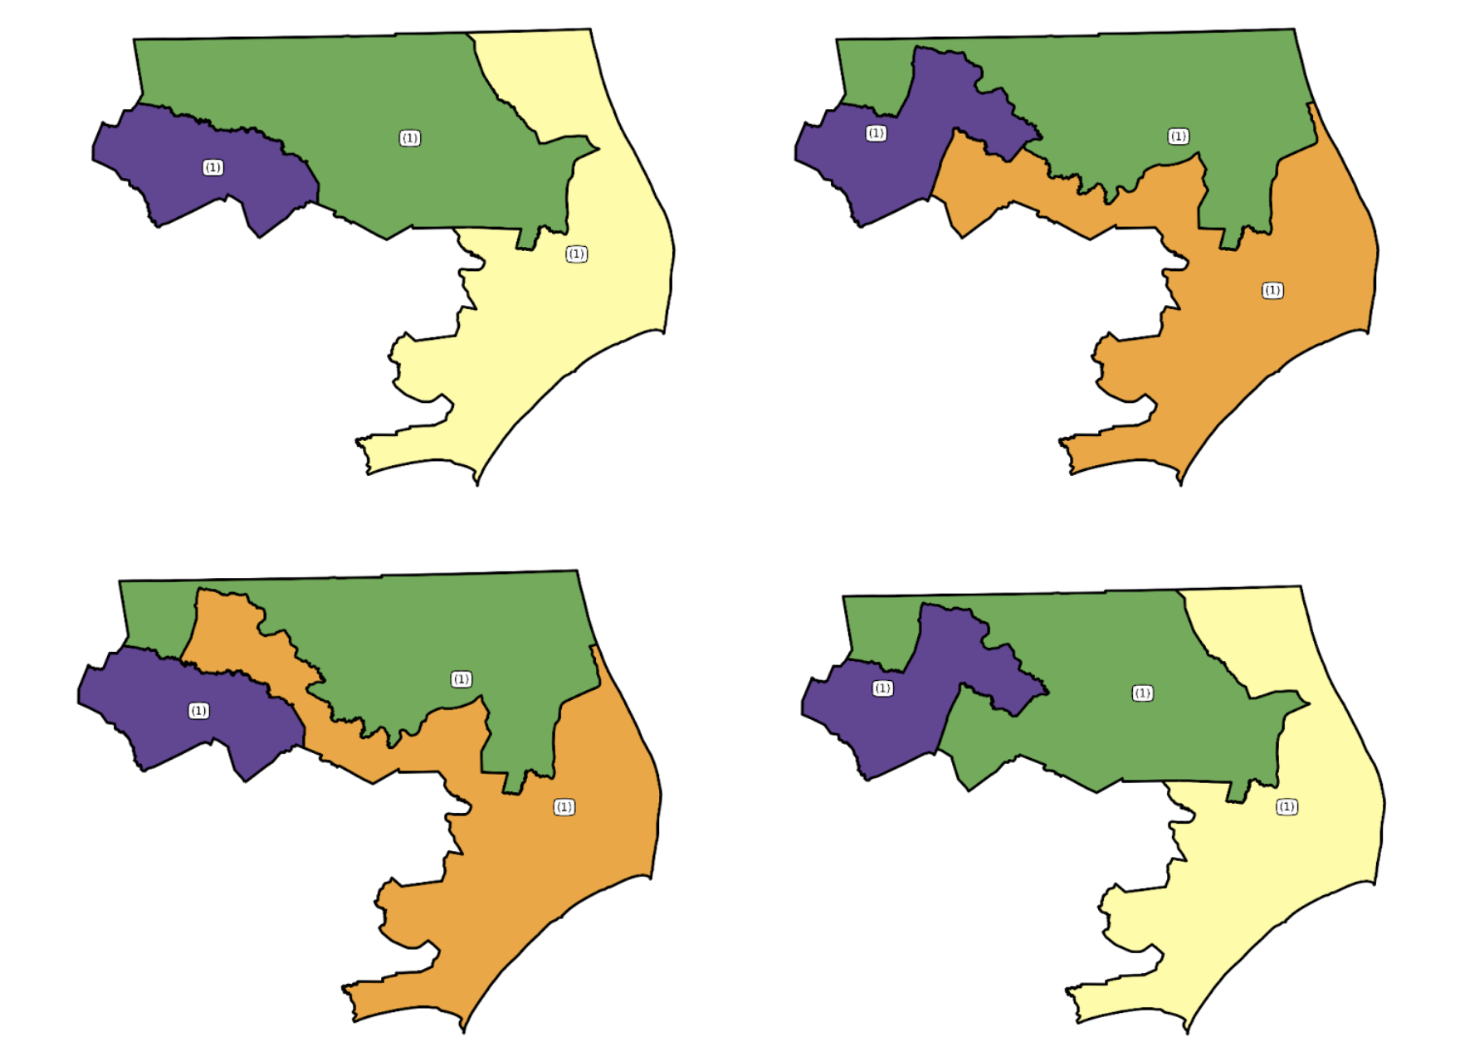 Race and County Clusters in North Carolina